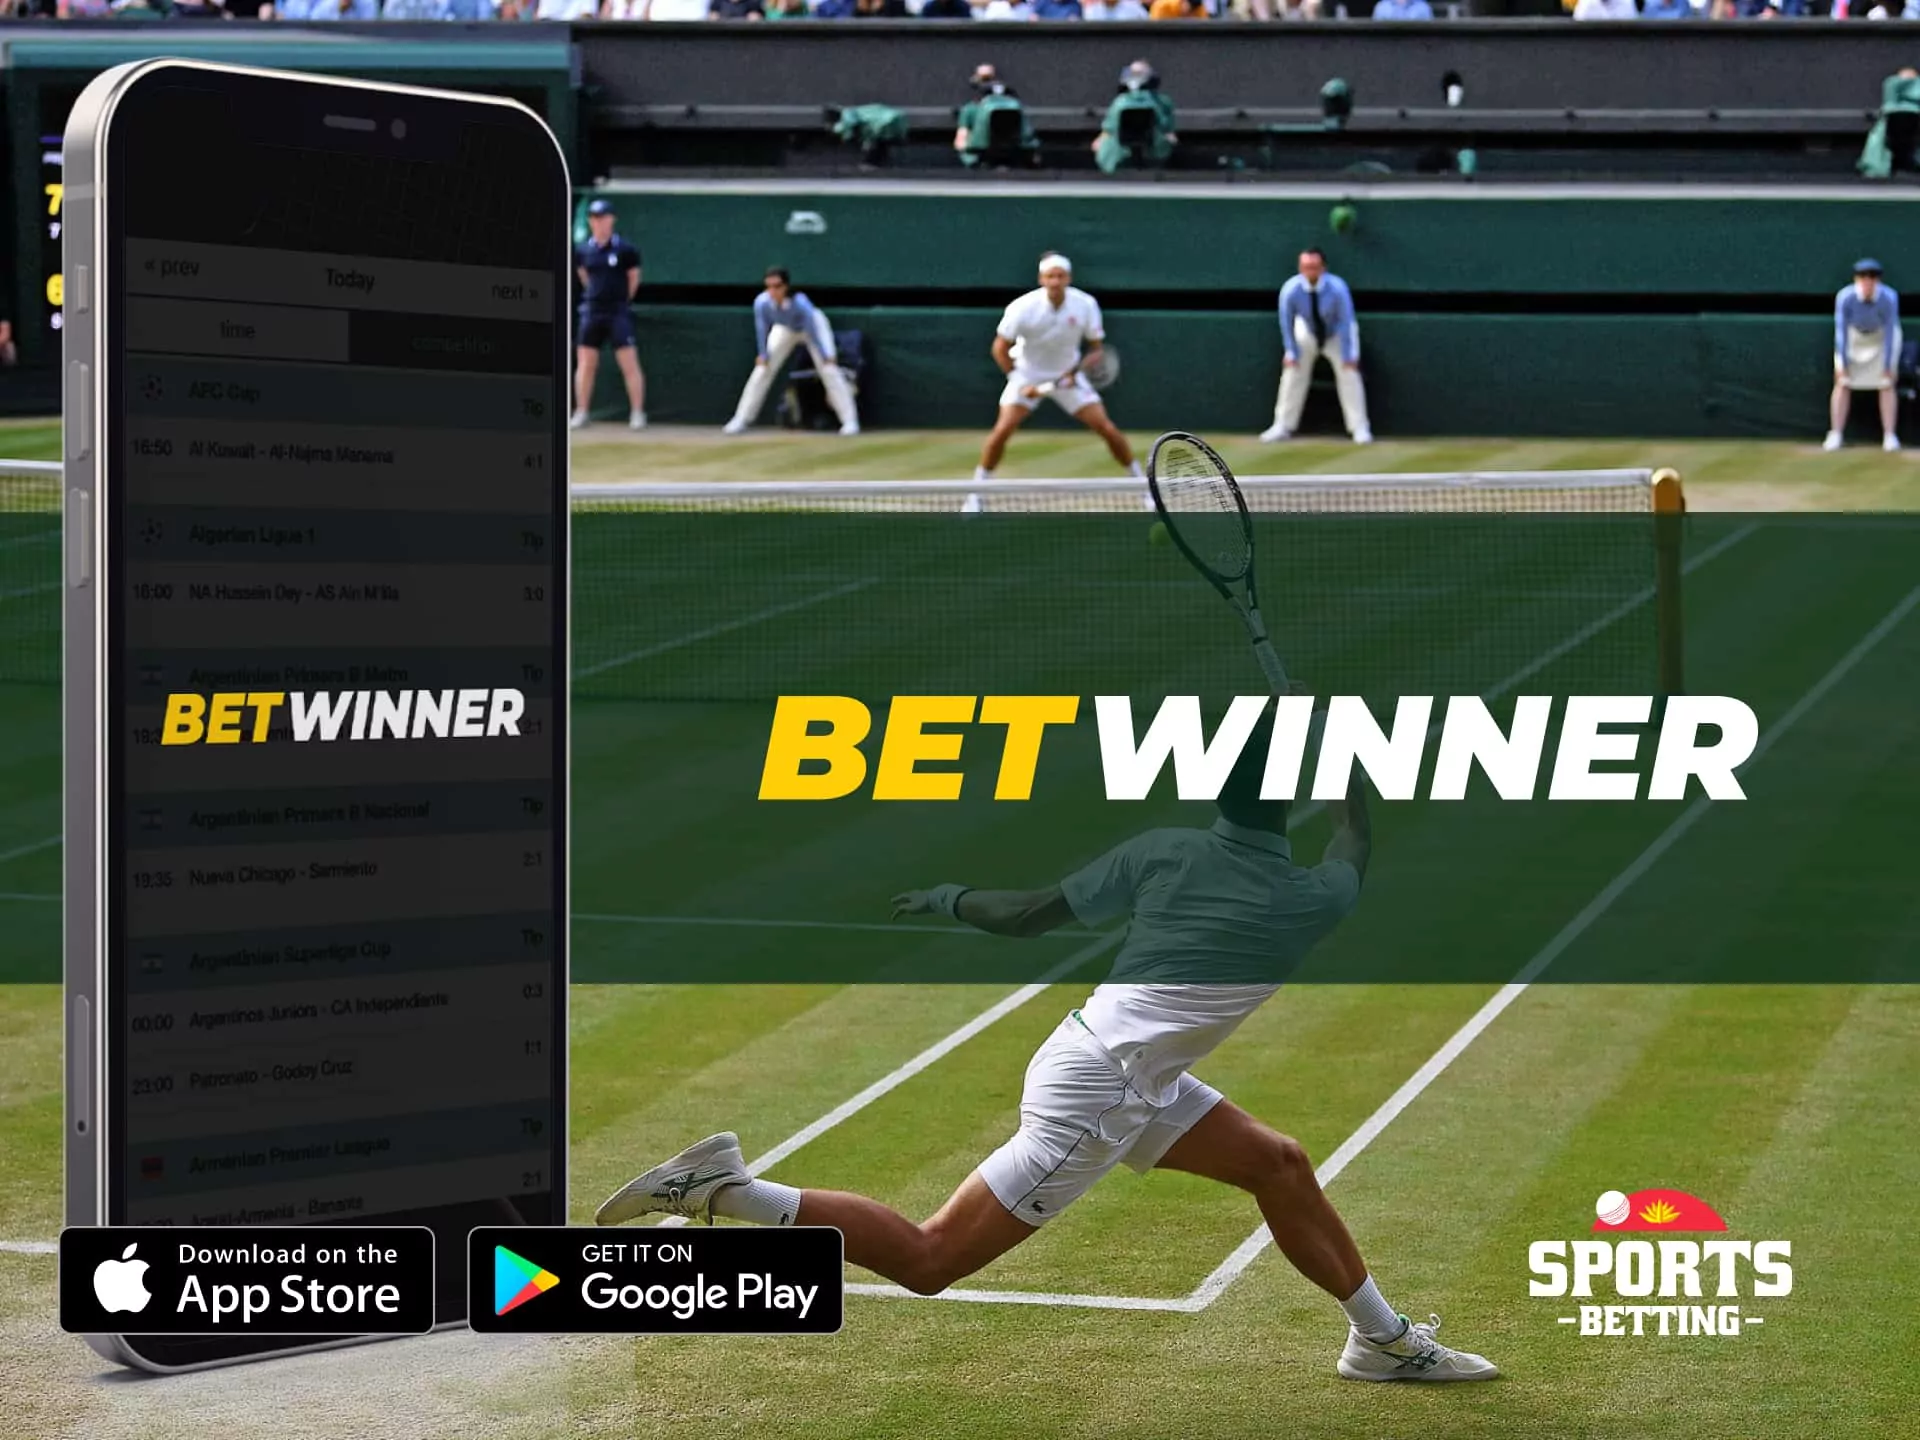 BetWinner tennis betting site which is authoritatively licensed and regulated.